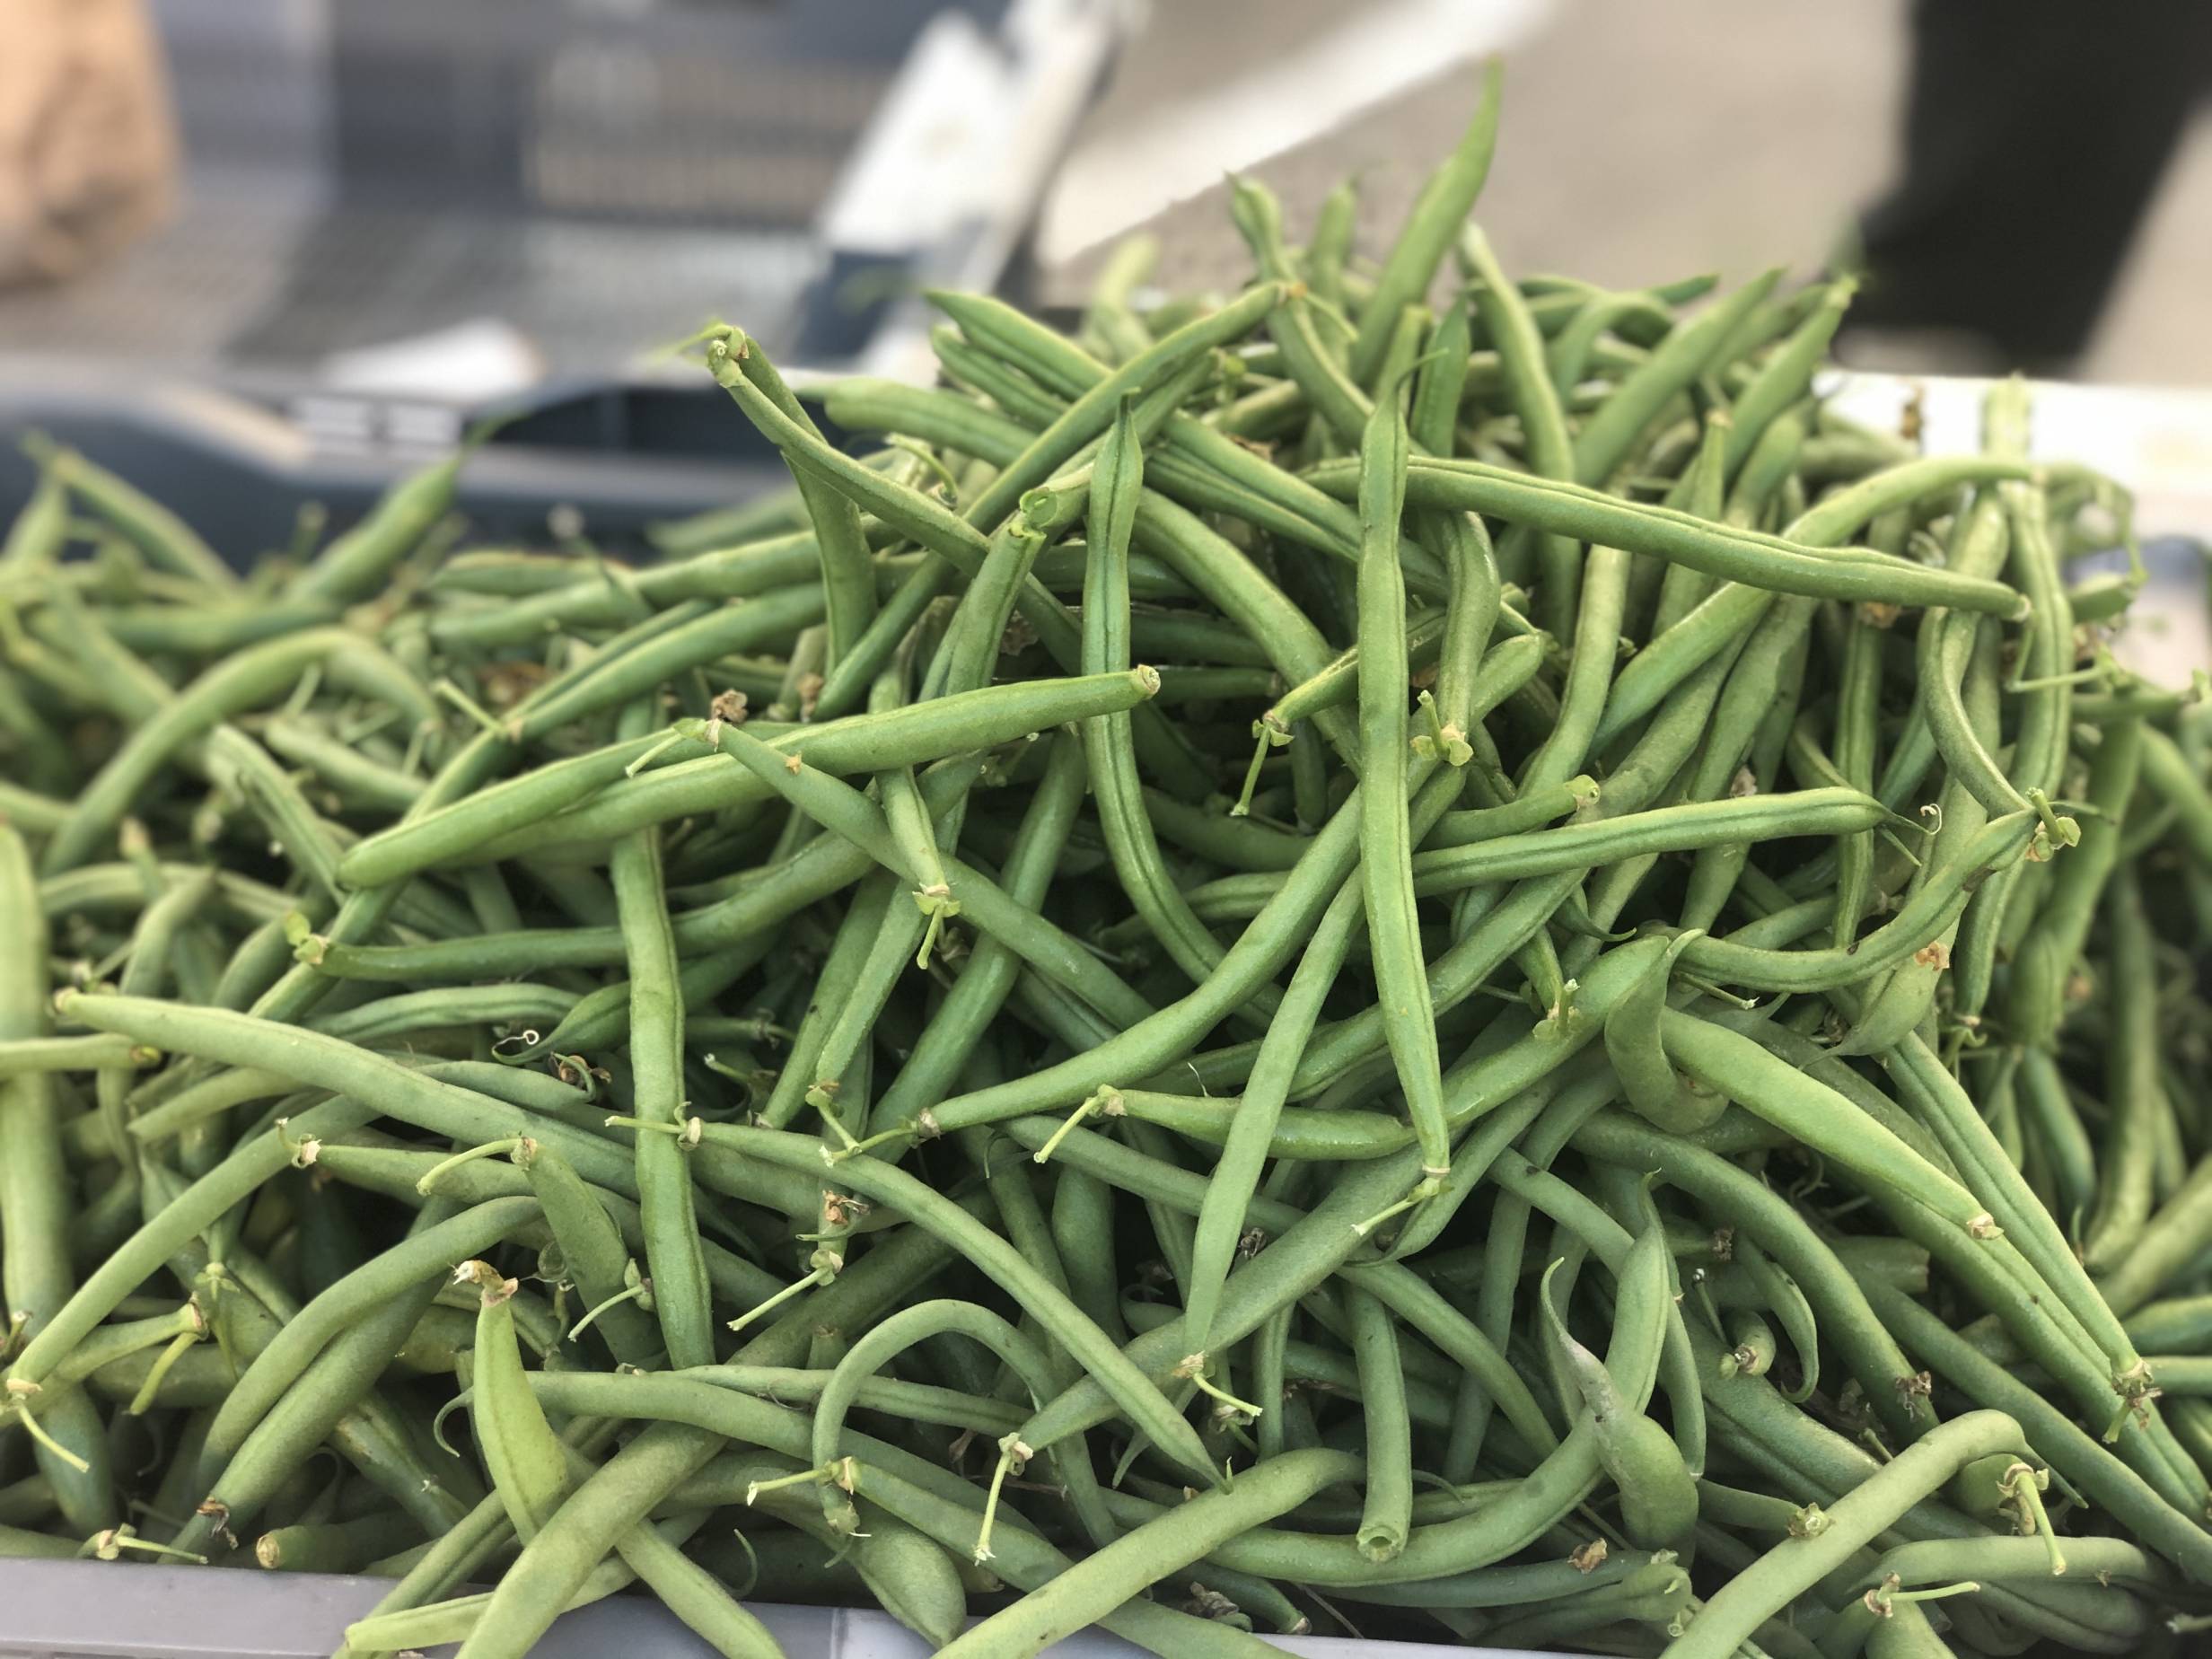 Thousands of green beans are stacked haphazardly in a container at the Urbana Market in the Square. Photo by Alyssa Buckley.